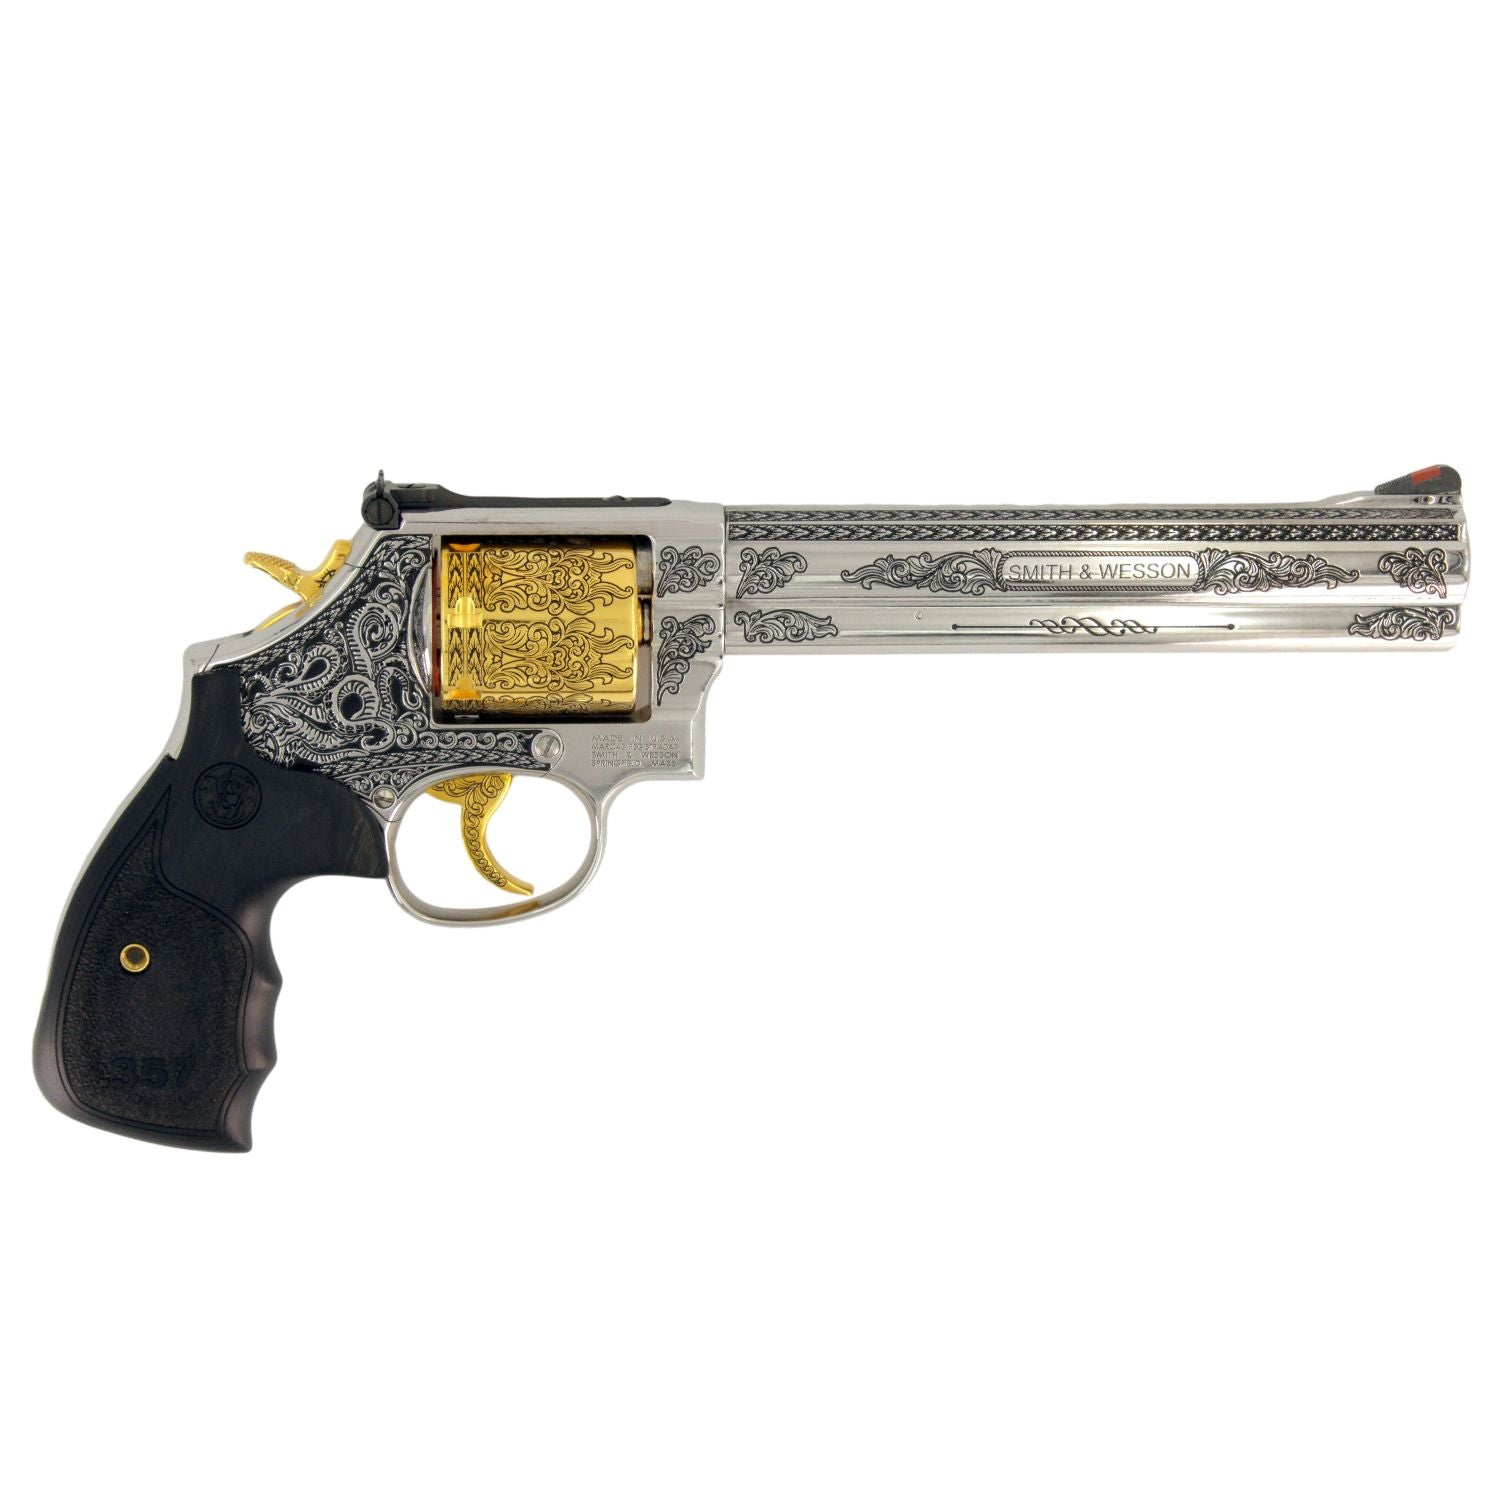 Smith & Wesson The Captain 686 Plus Engraved In High Polish Stainless Steel with 24 karat Gold Accents SKU: 6966492069990, Gold Gun, Gold Firearm, Gold Revolver 